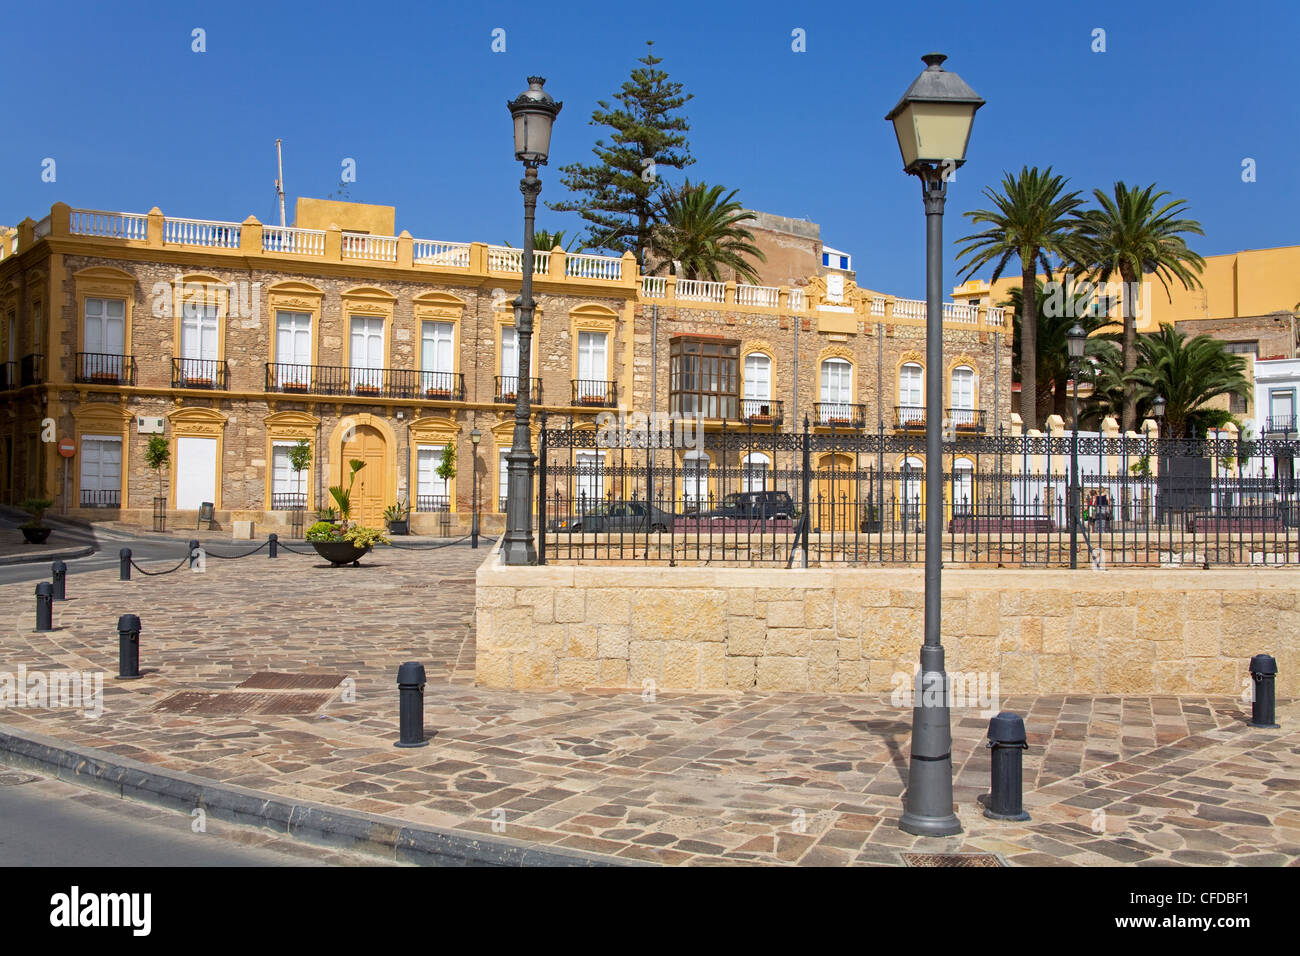 Medina Sidonia (old town) District, Melilla, Spain, Spanish North Africa, Africa Stock Photo